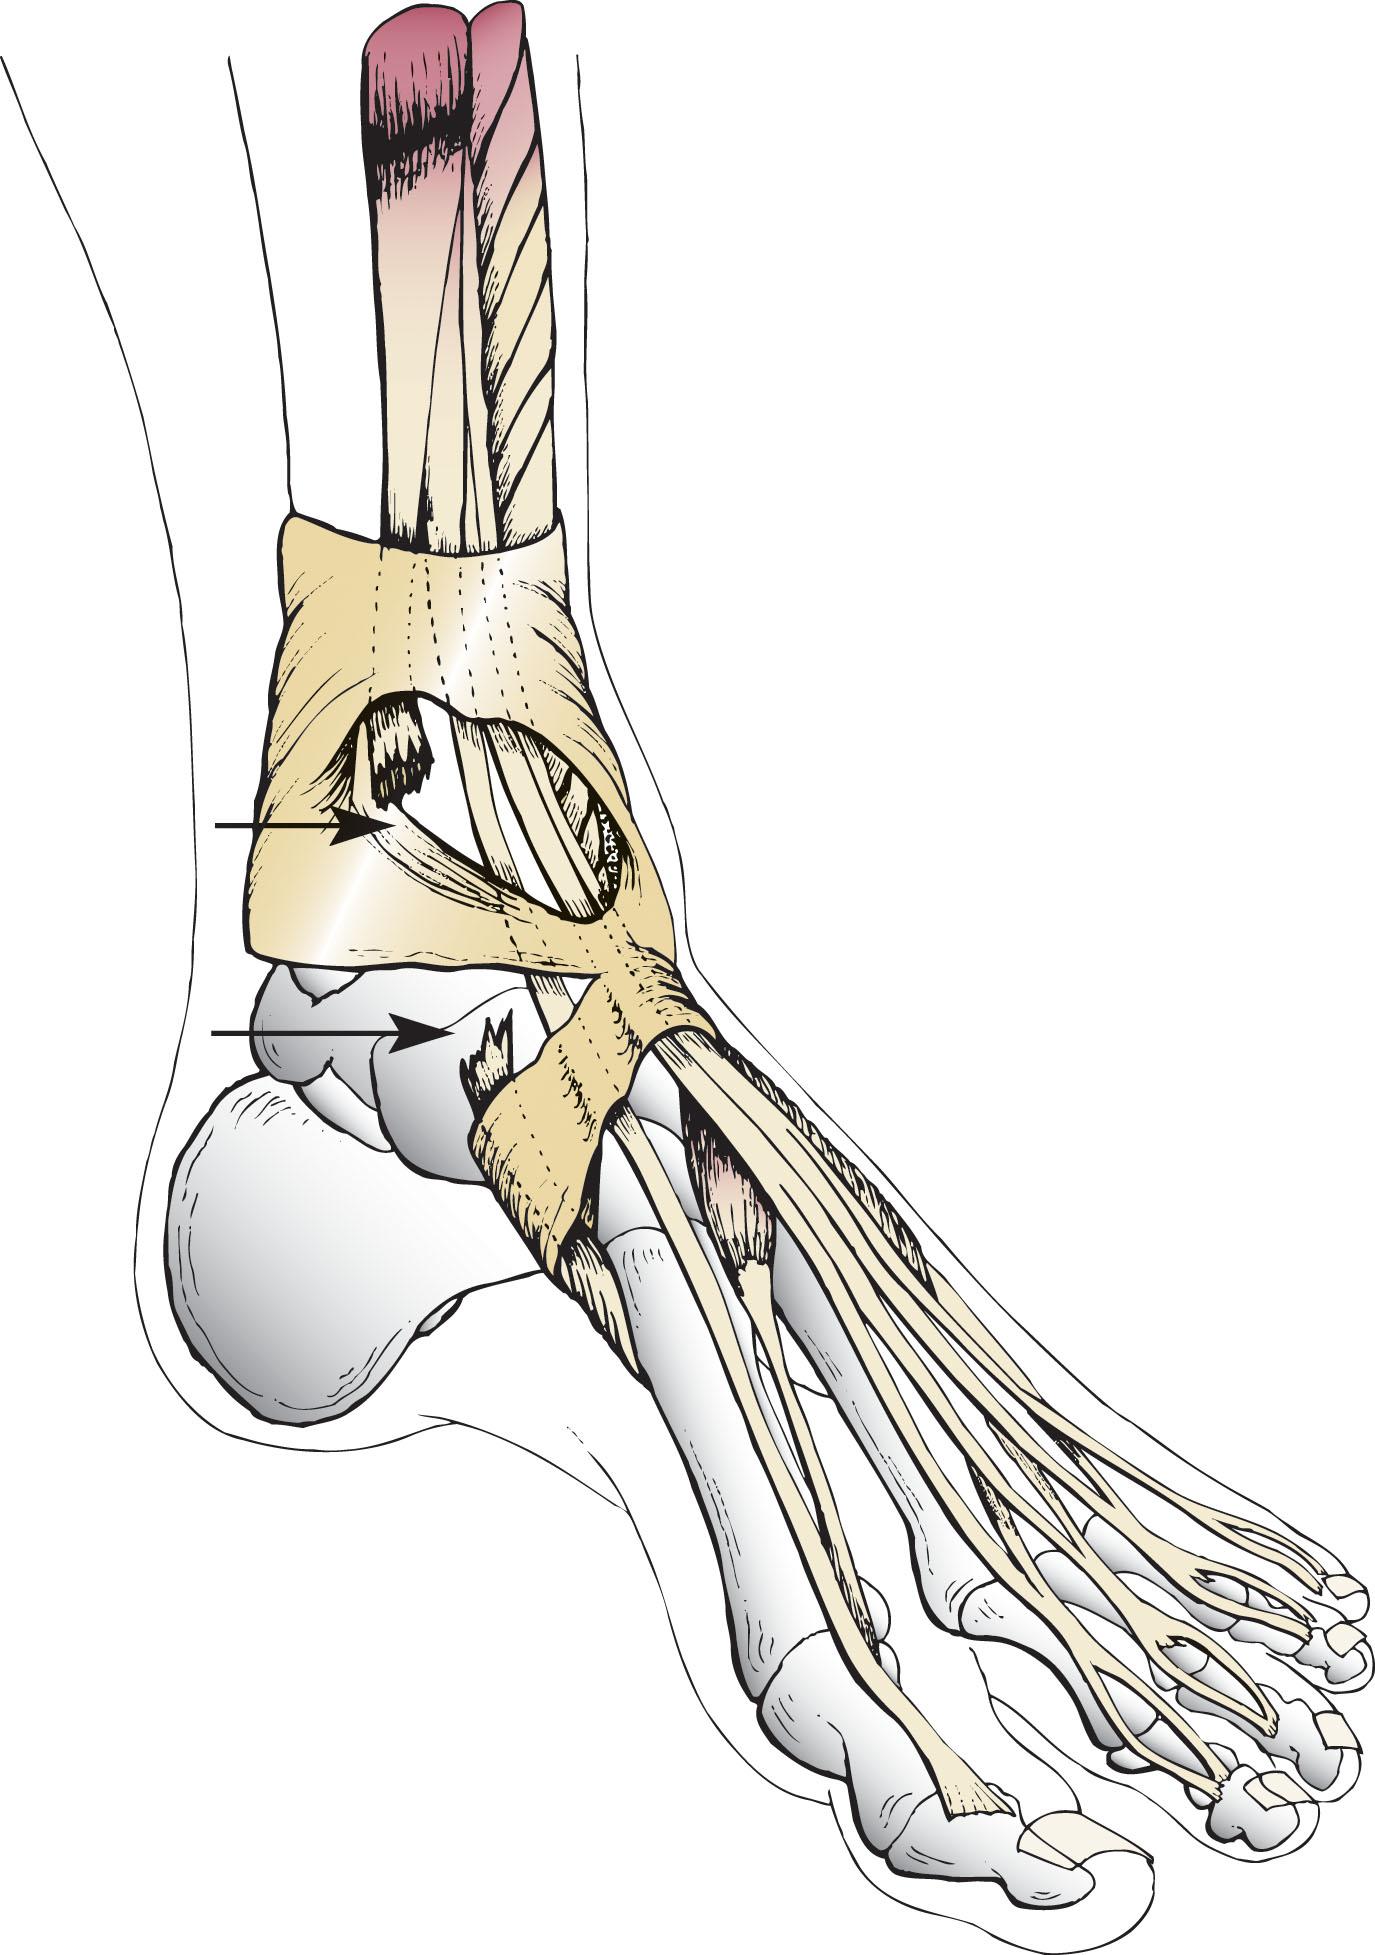 Fig. 28-3, Spontaneous rupture of anterior tibial tendon (arrows) typically occurs in distal 3 cm of tendon.